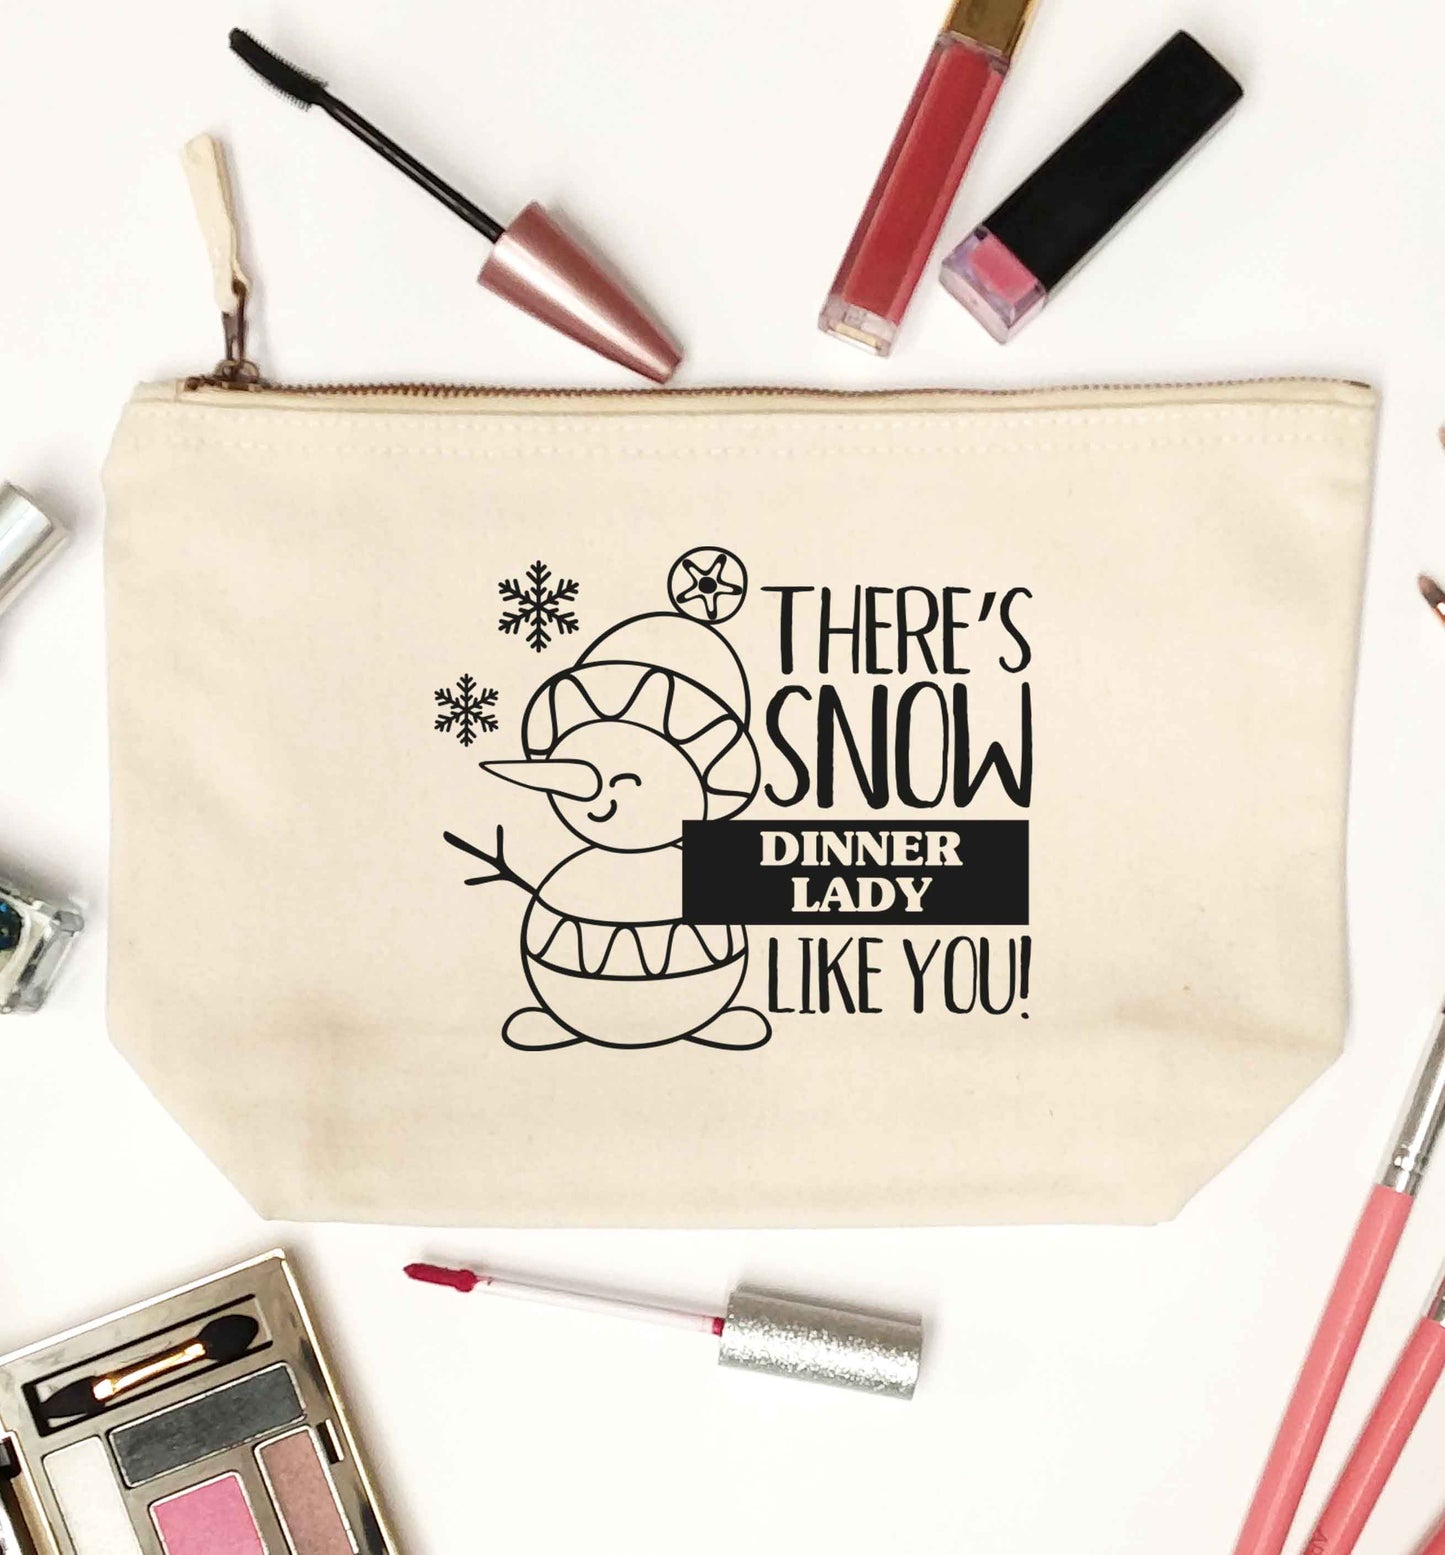 There's snow dinner lady like you natural makeup bag